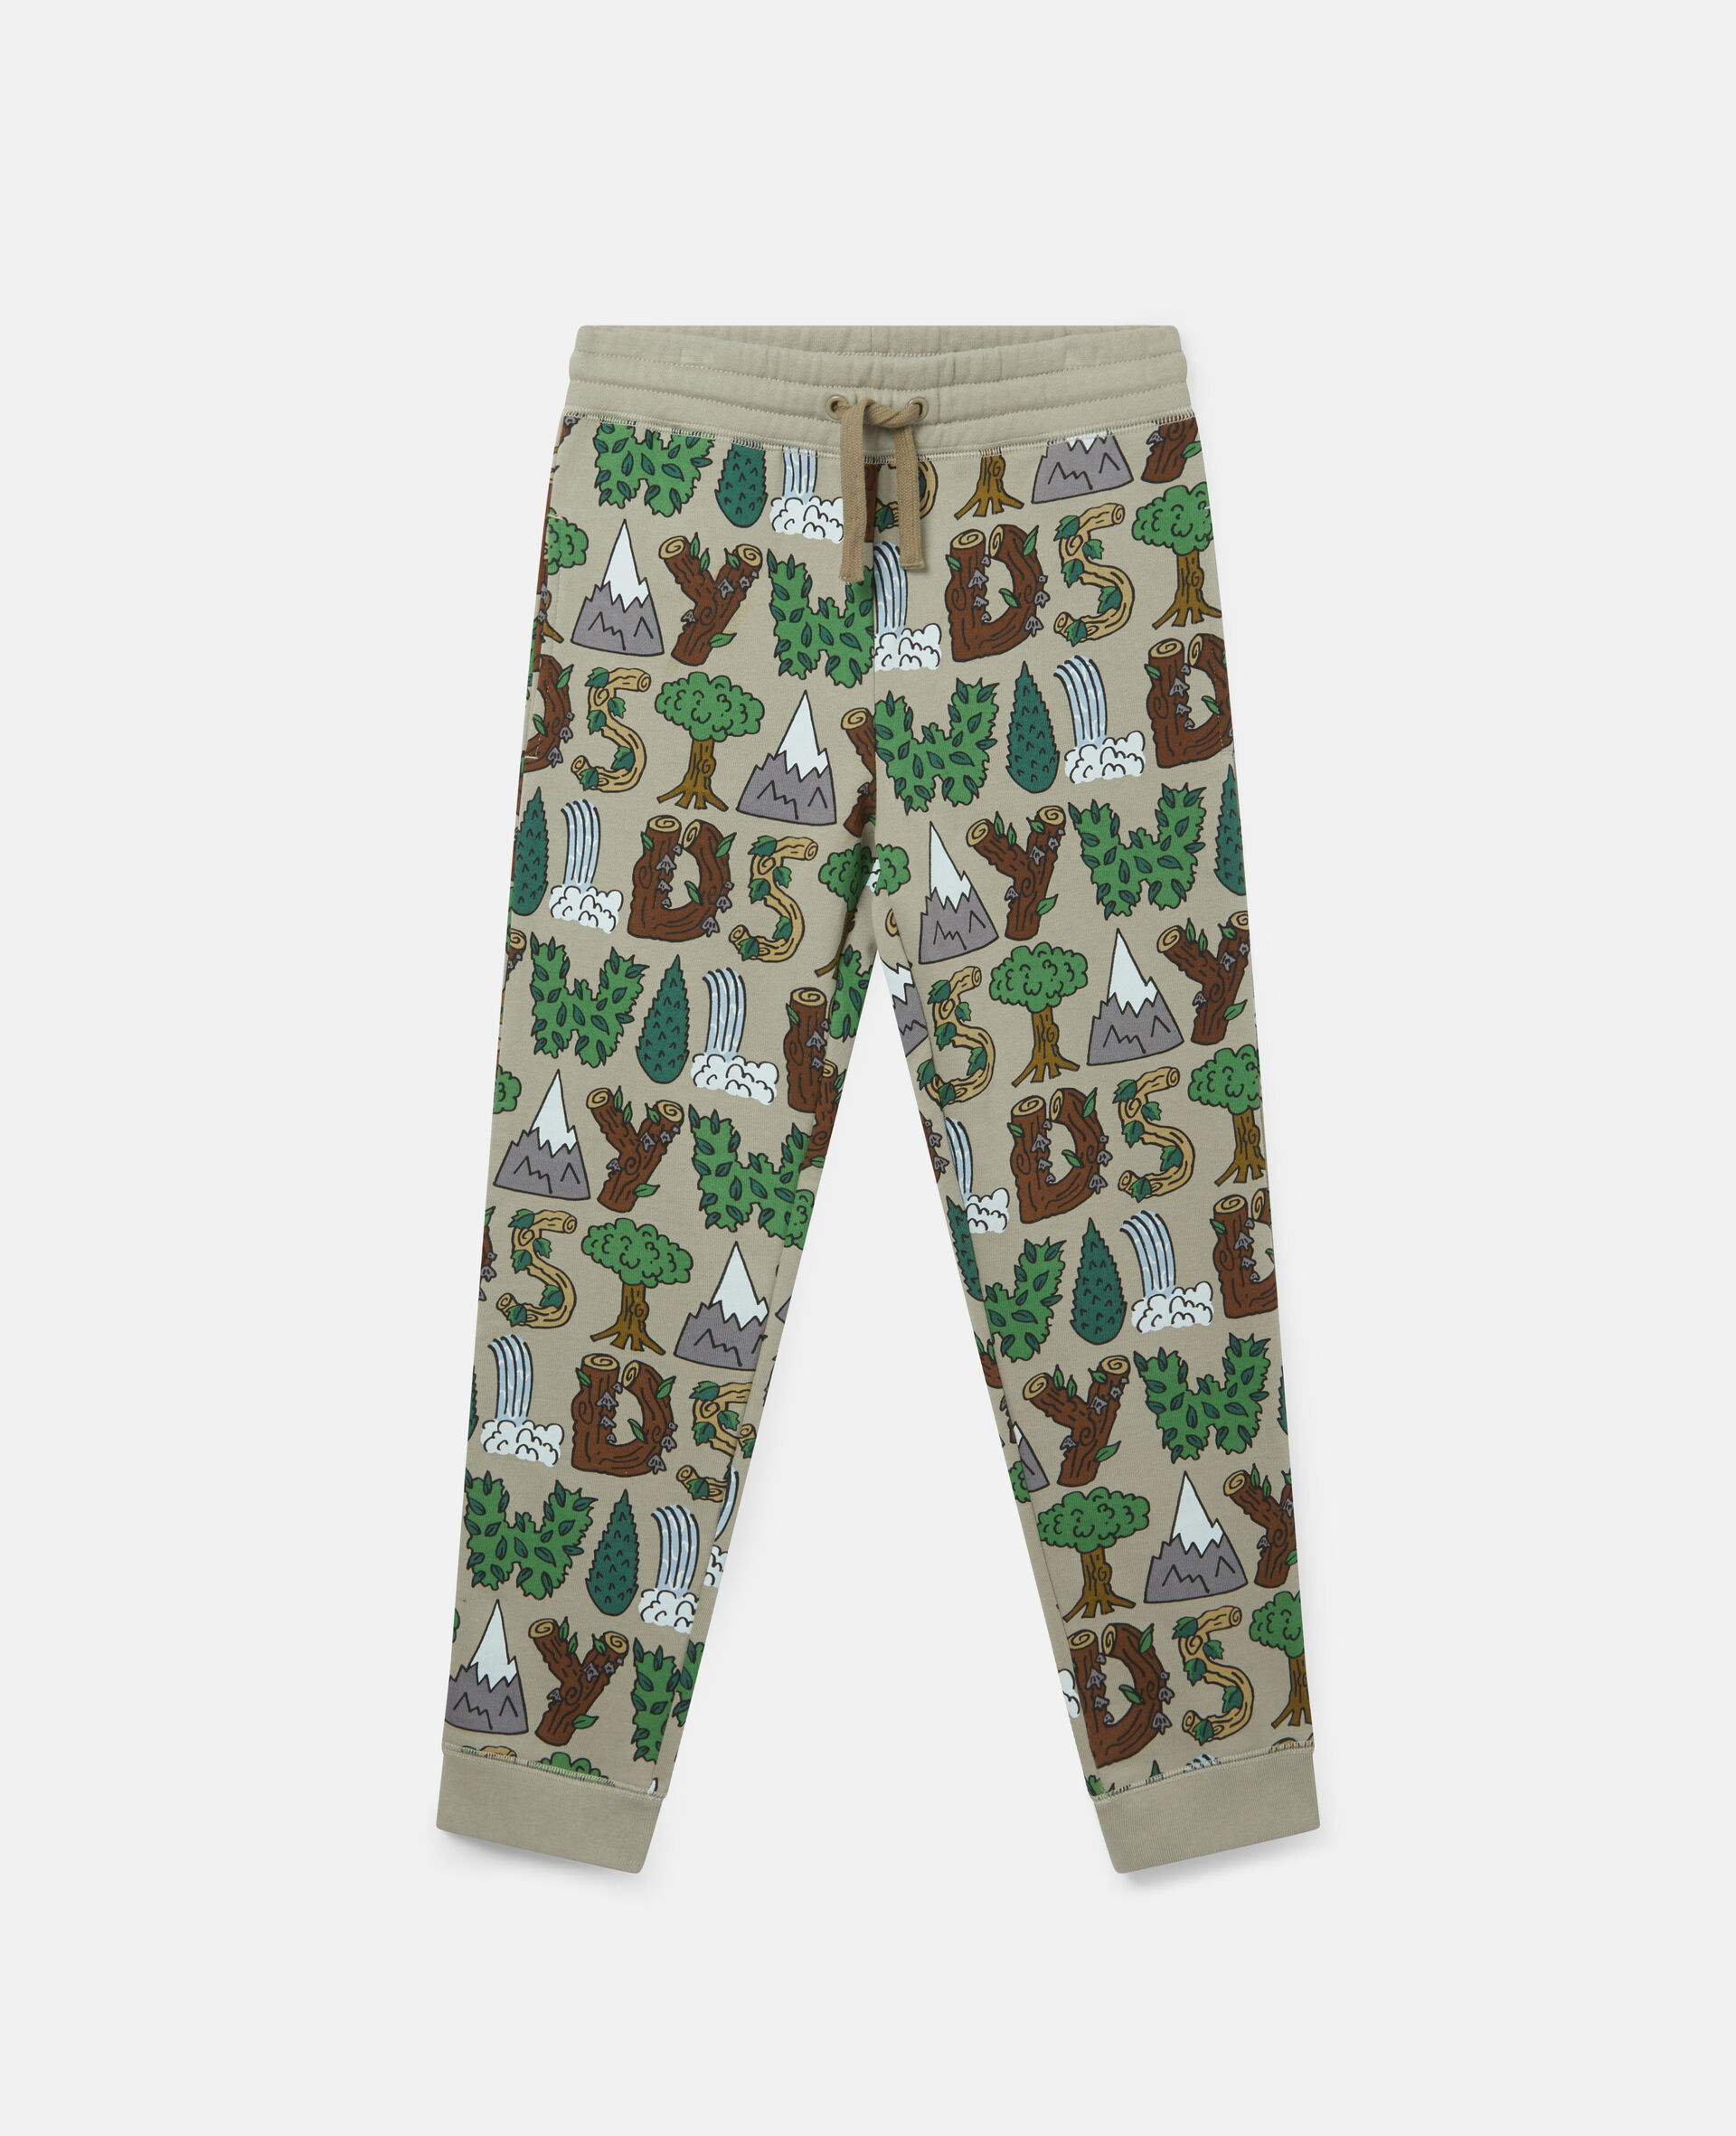 'Stay Wild' Fleece Joggers-Multicolour-large image number 0